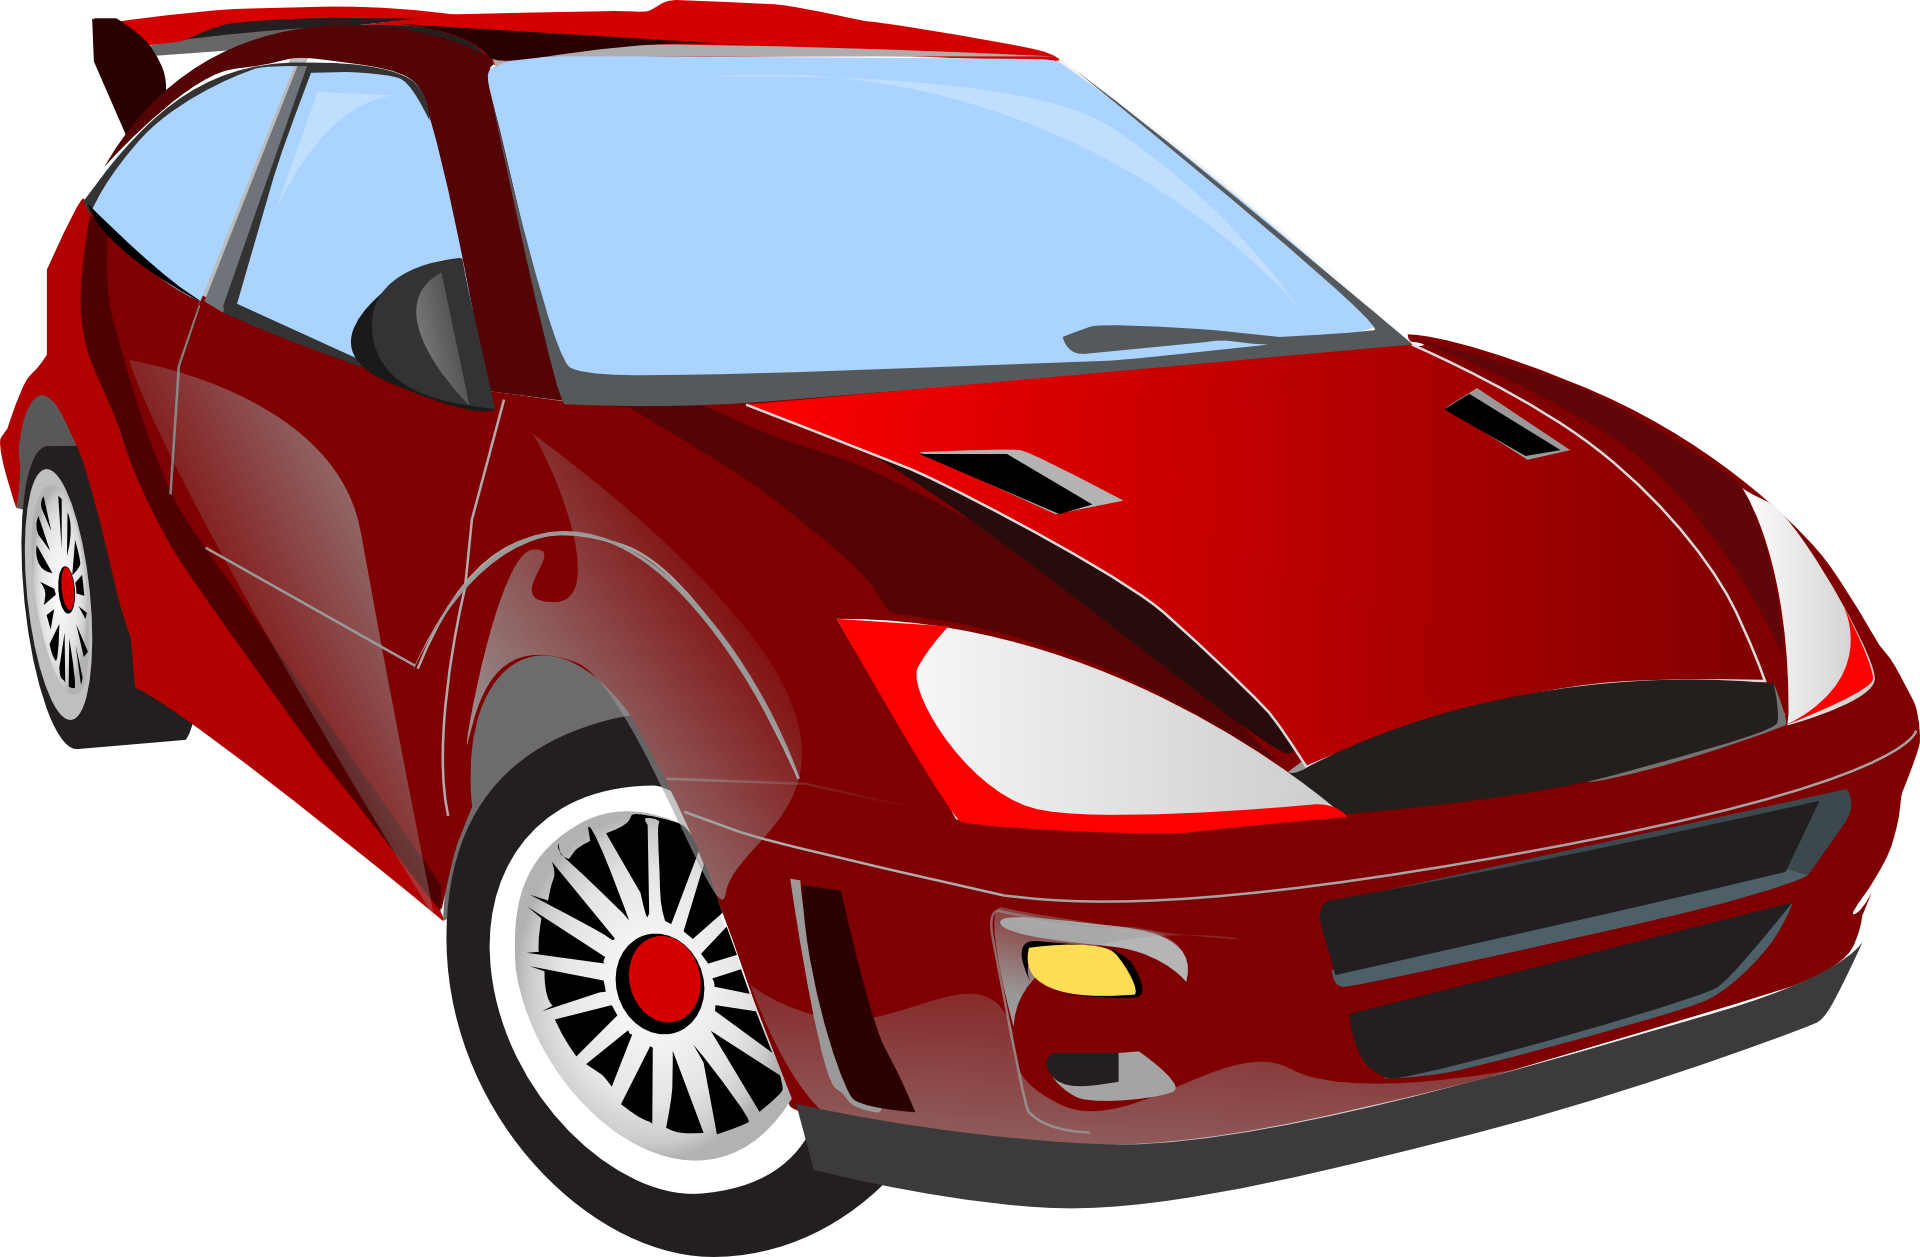 Car red shiny drawing free image download